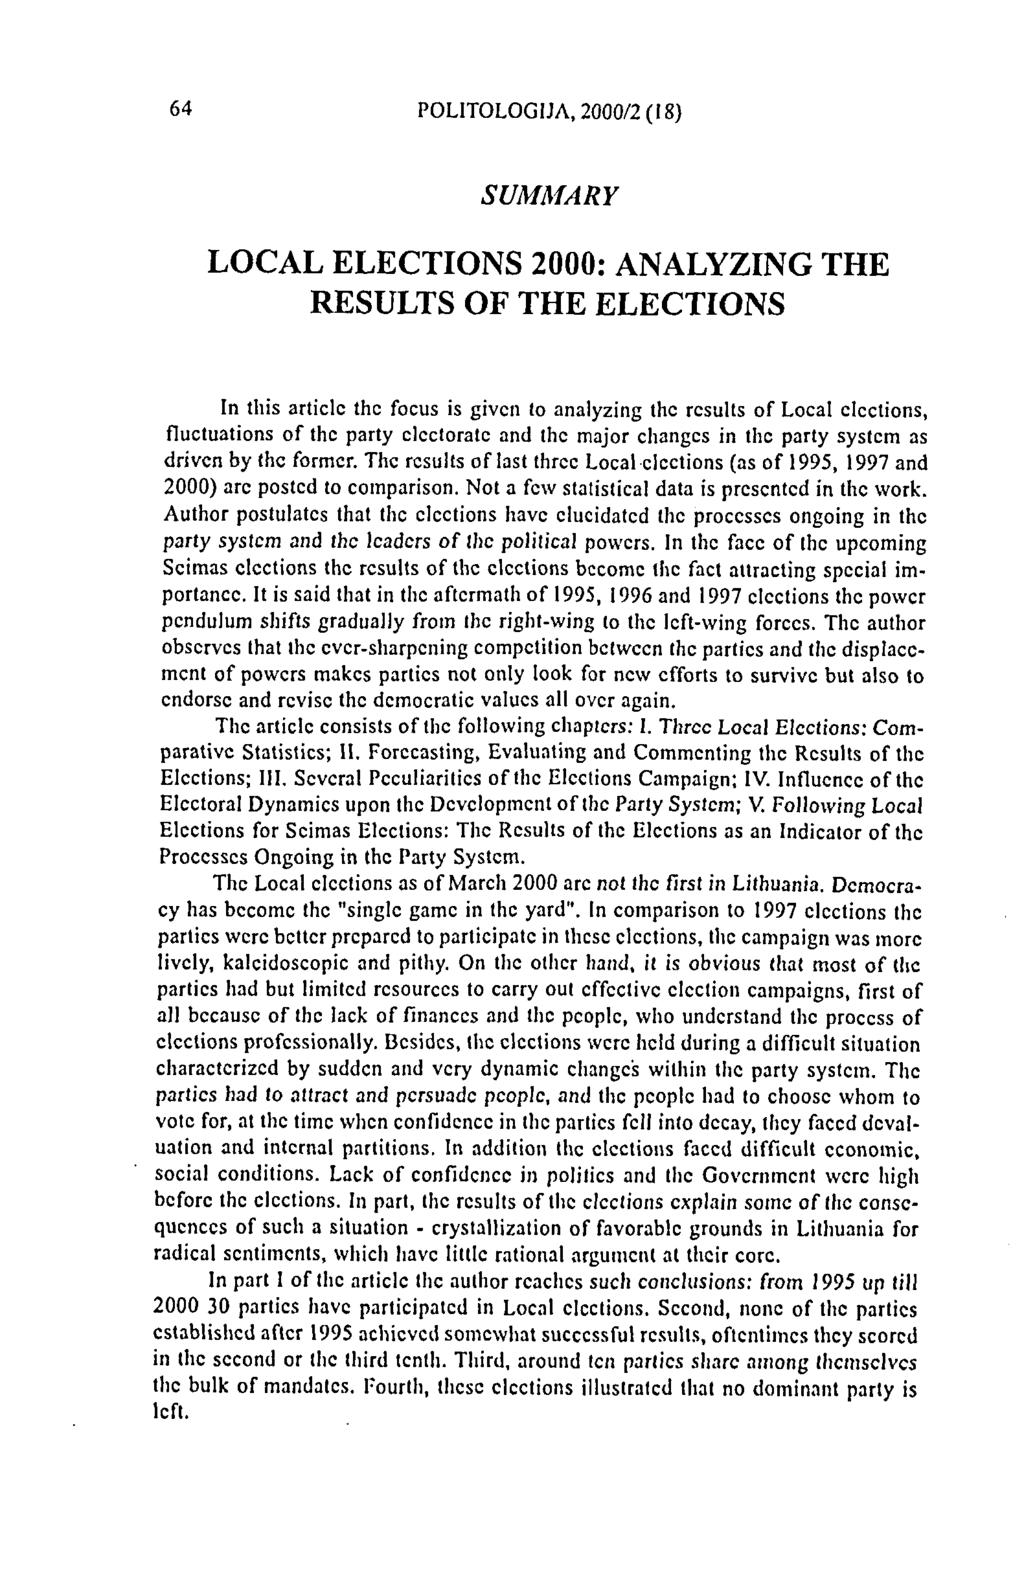 64 POLITOLOGIJA, 2000/2 (IS) SUMMARY LOCAL ELECTIONS 2000: ANALYZING THE RESULTS OF THE ELECTIONS In this article the focus is given to analyzing the results of Local elections, fluctuations of the